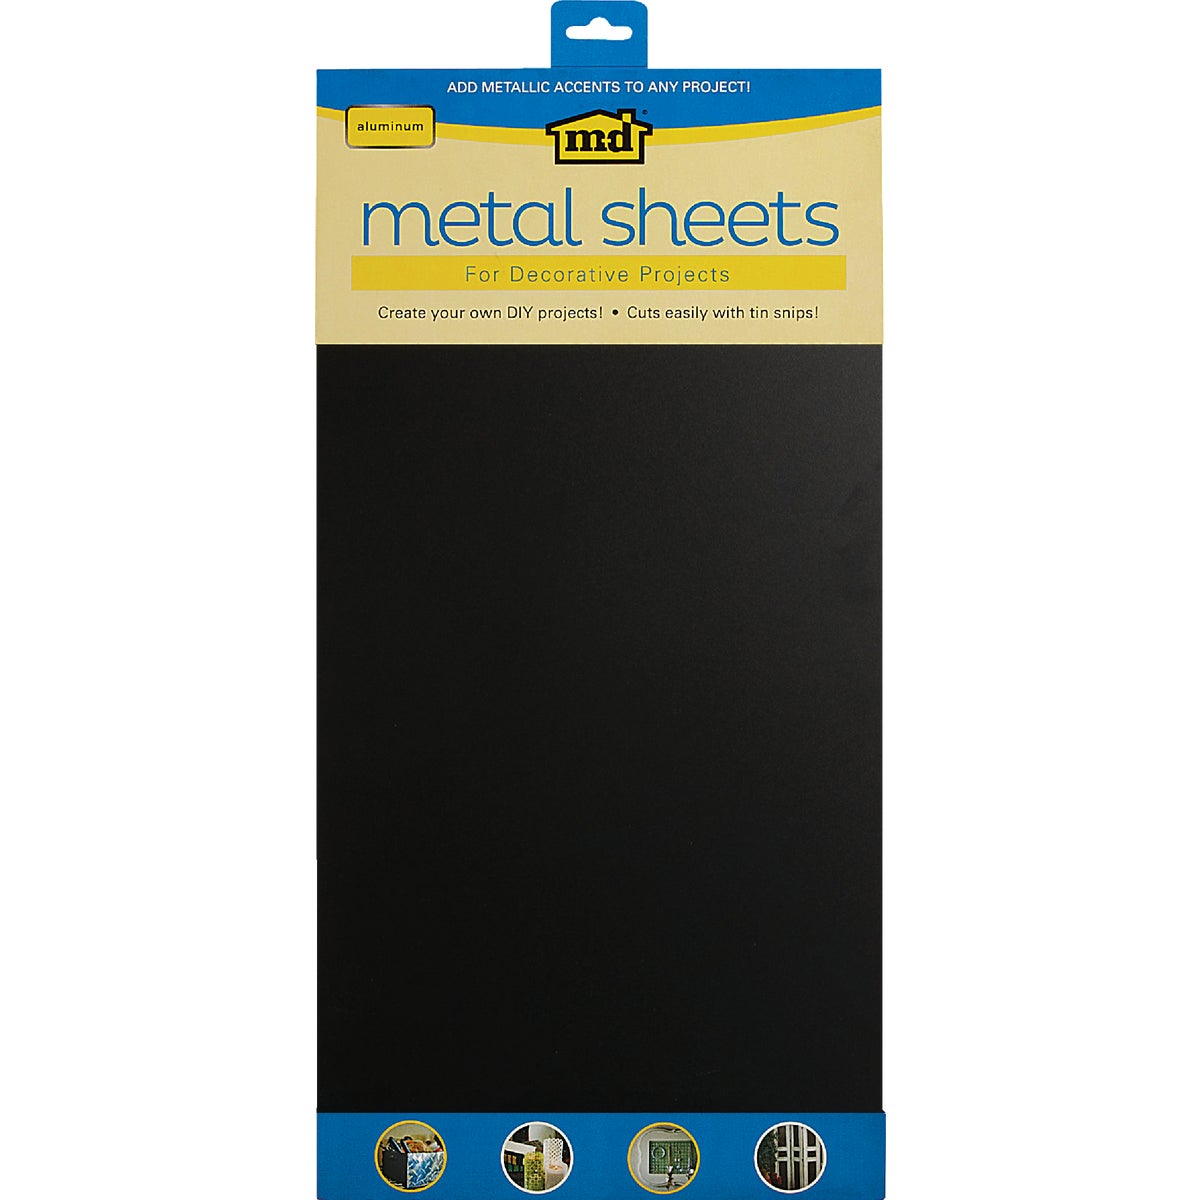 Item 260659, Decorative magnetic chalkboard sheet is easy to erase.